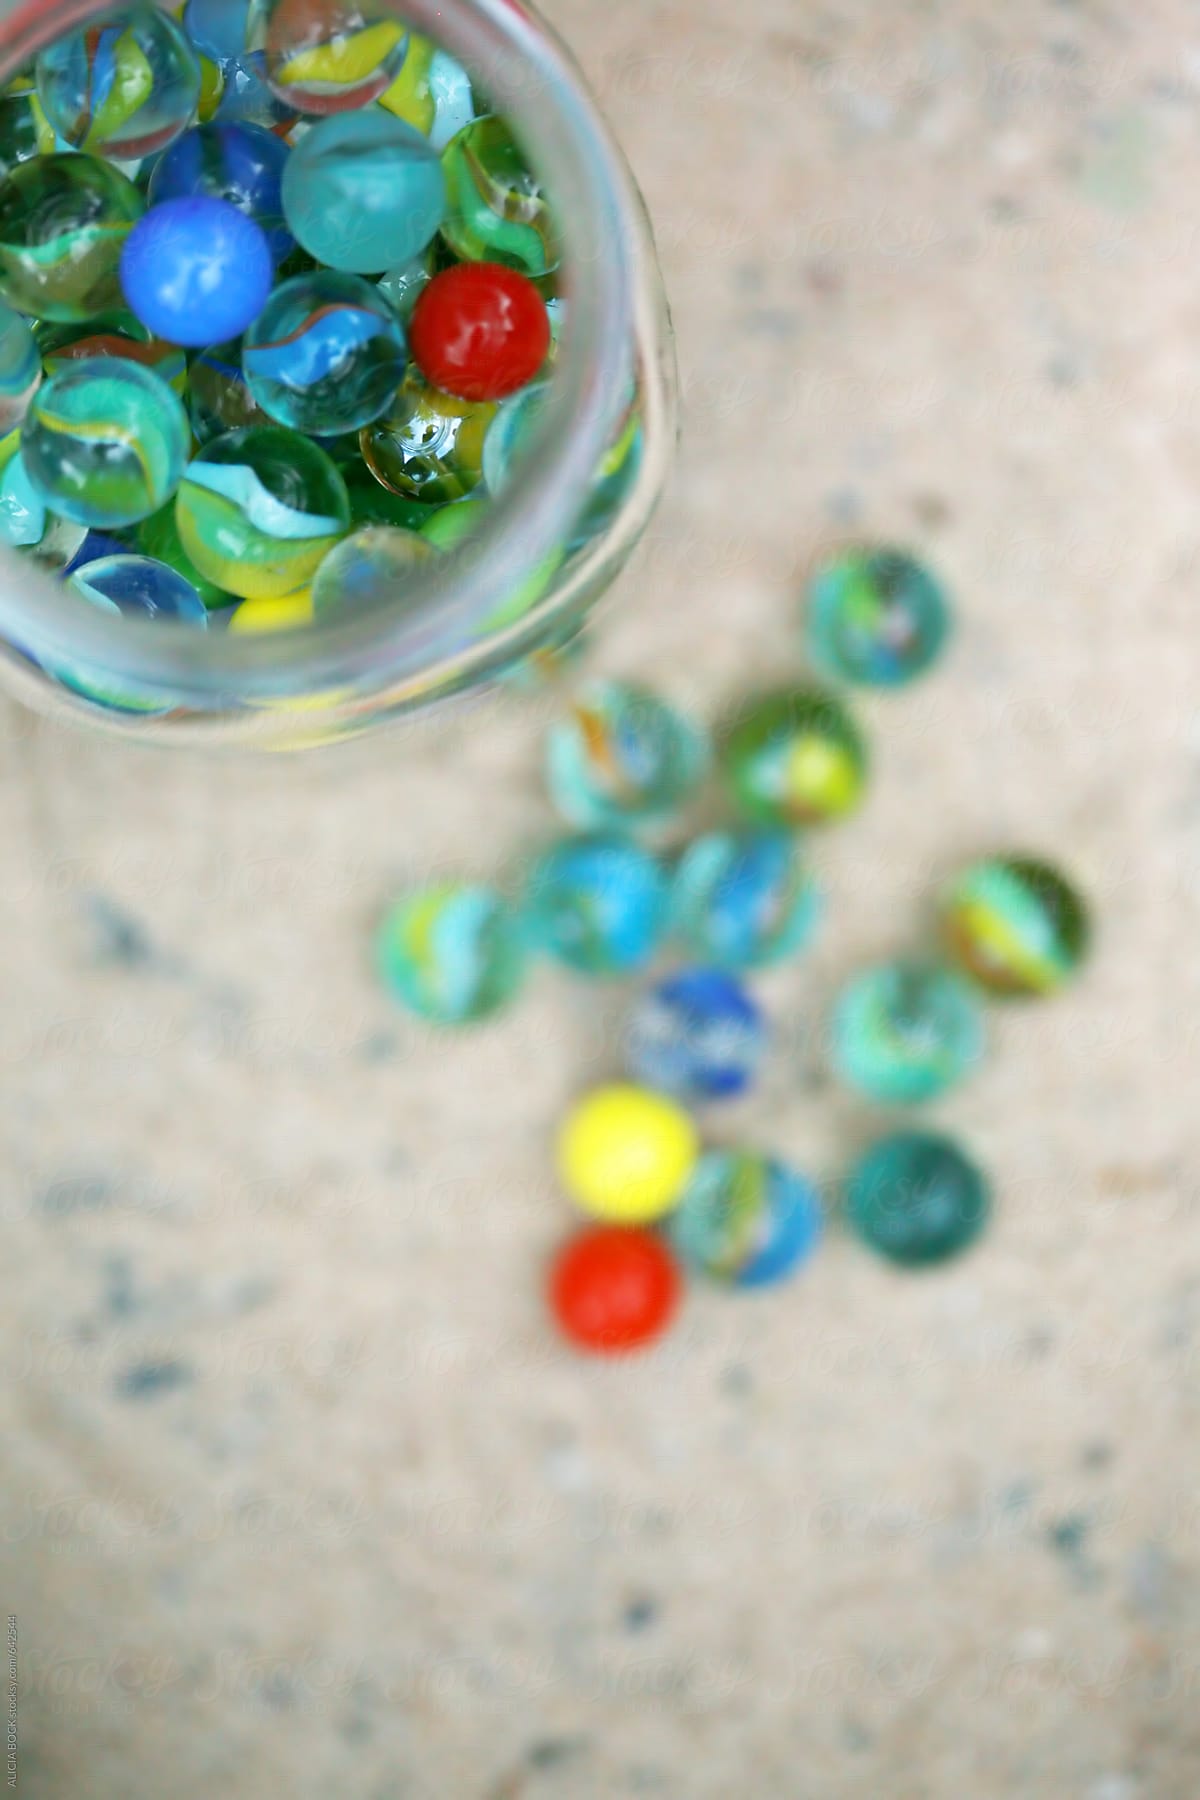 A Jar Of Colorful Glass Marbles Ready To Start A Game In The Sand